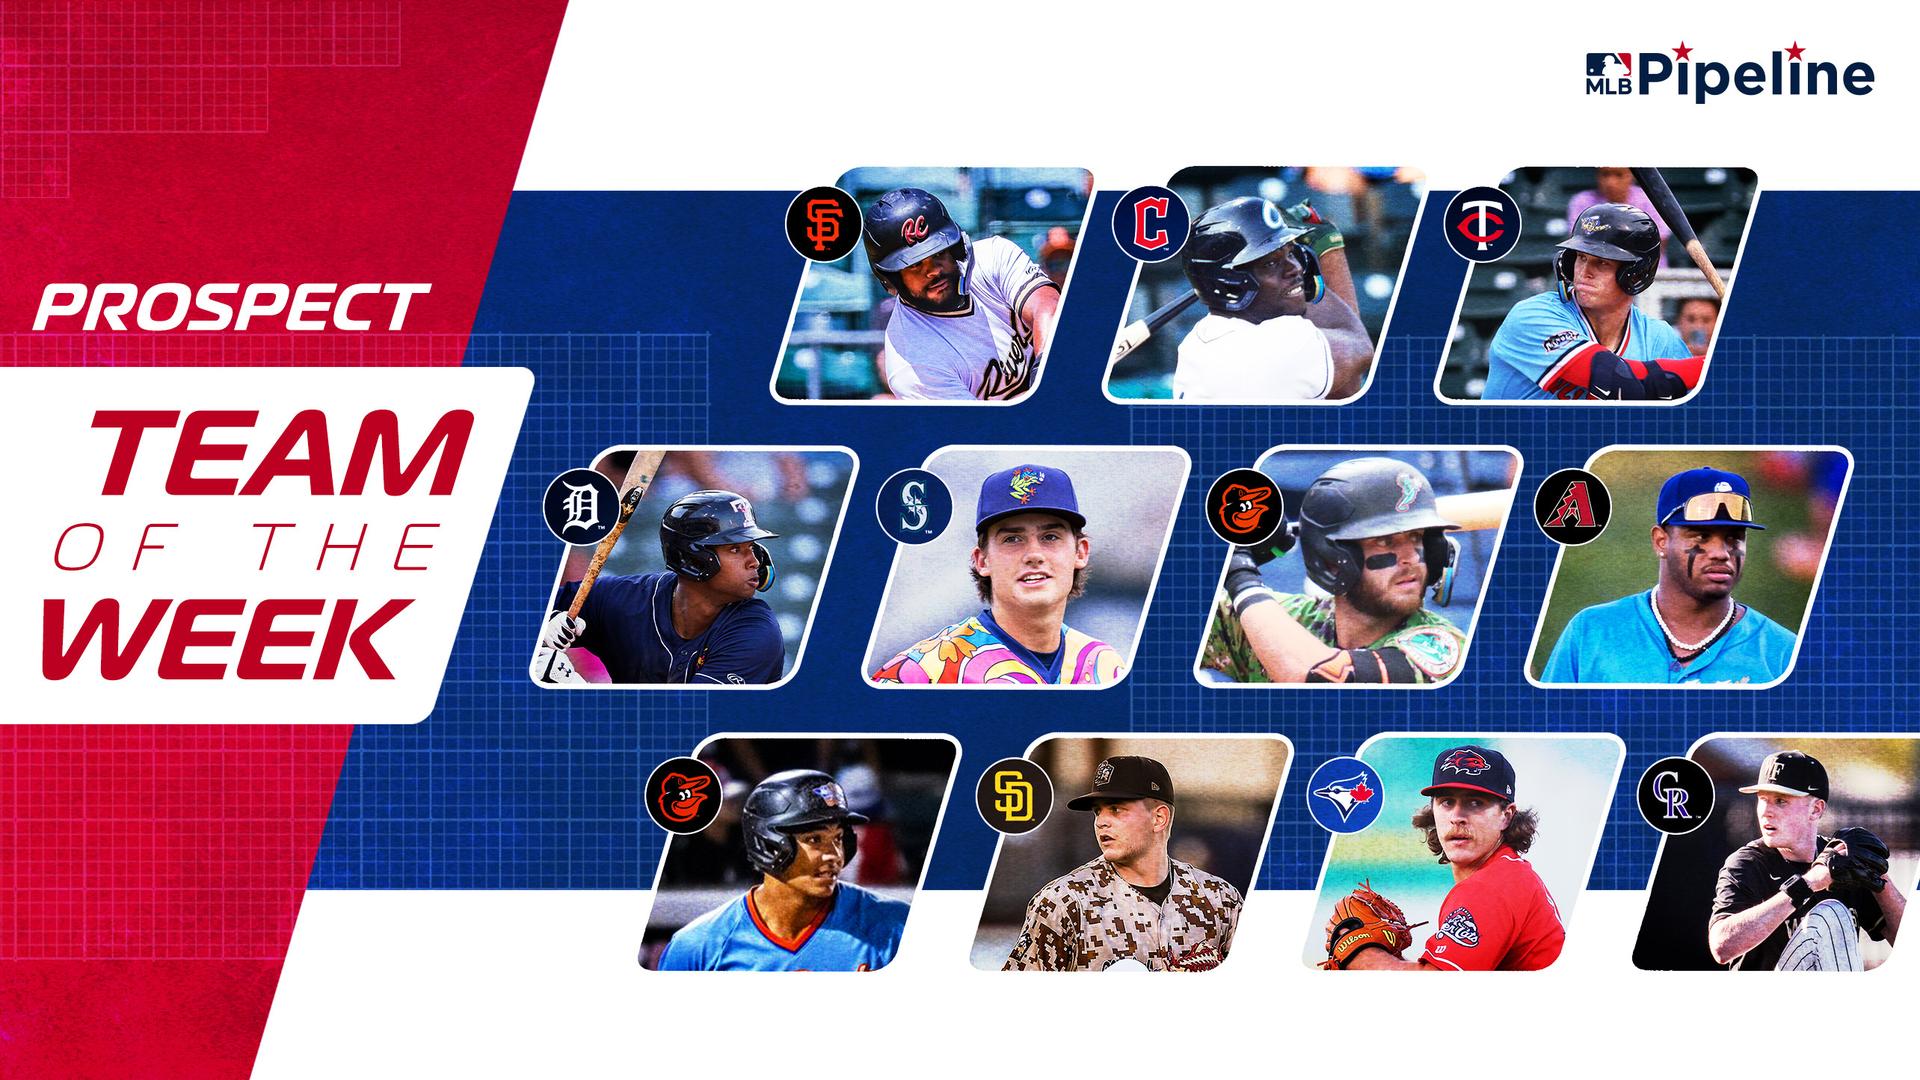 11 Minor League players are pictured next to the words Prospect Team of the Week